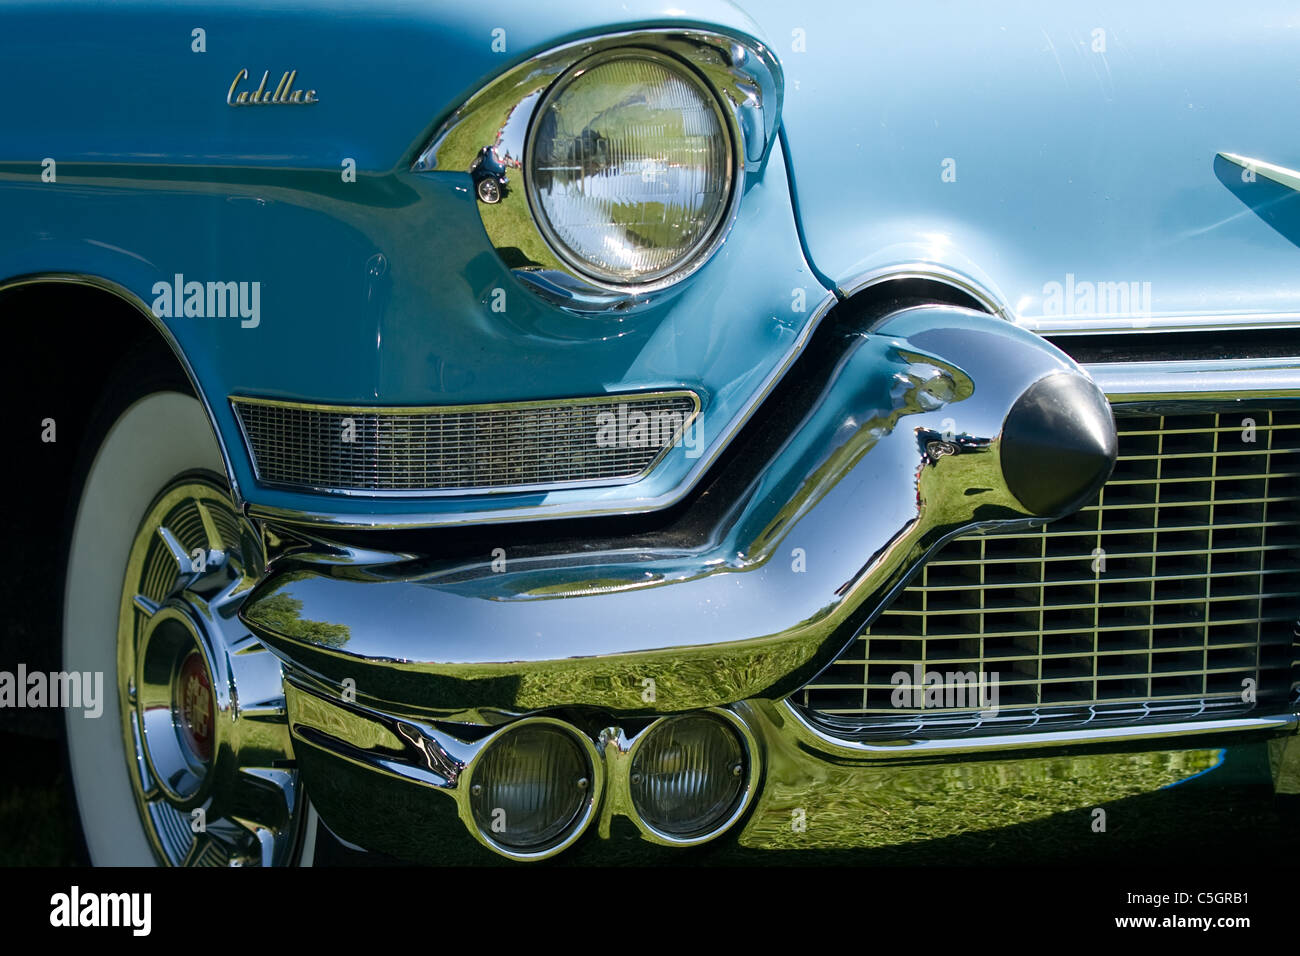 The front end of a vintage Cadillac car. Stock Photo